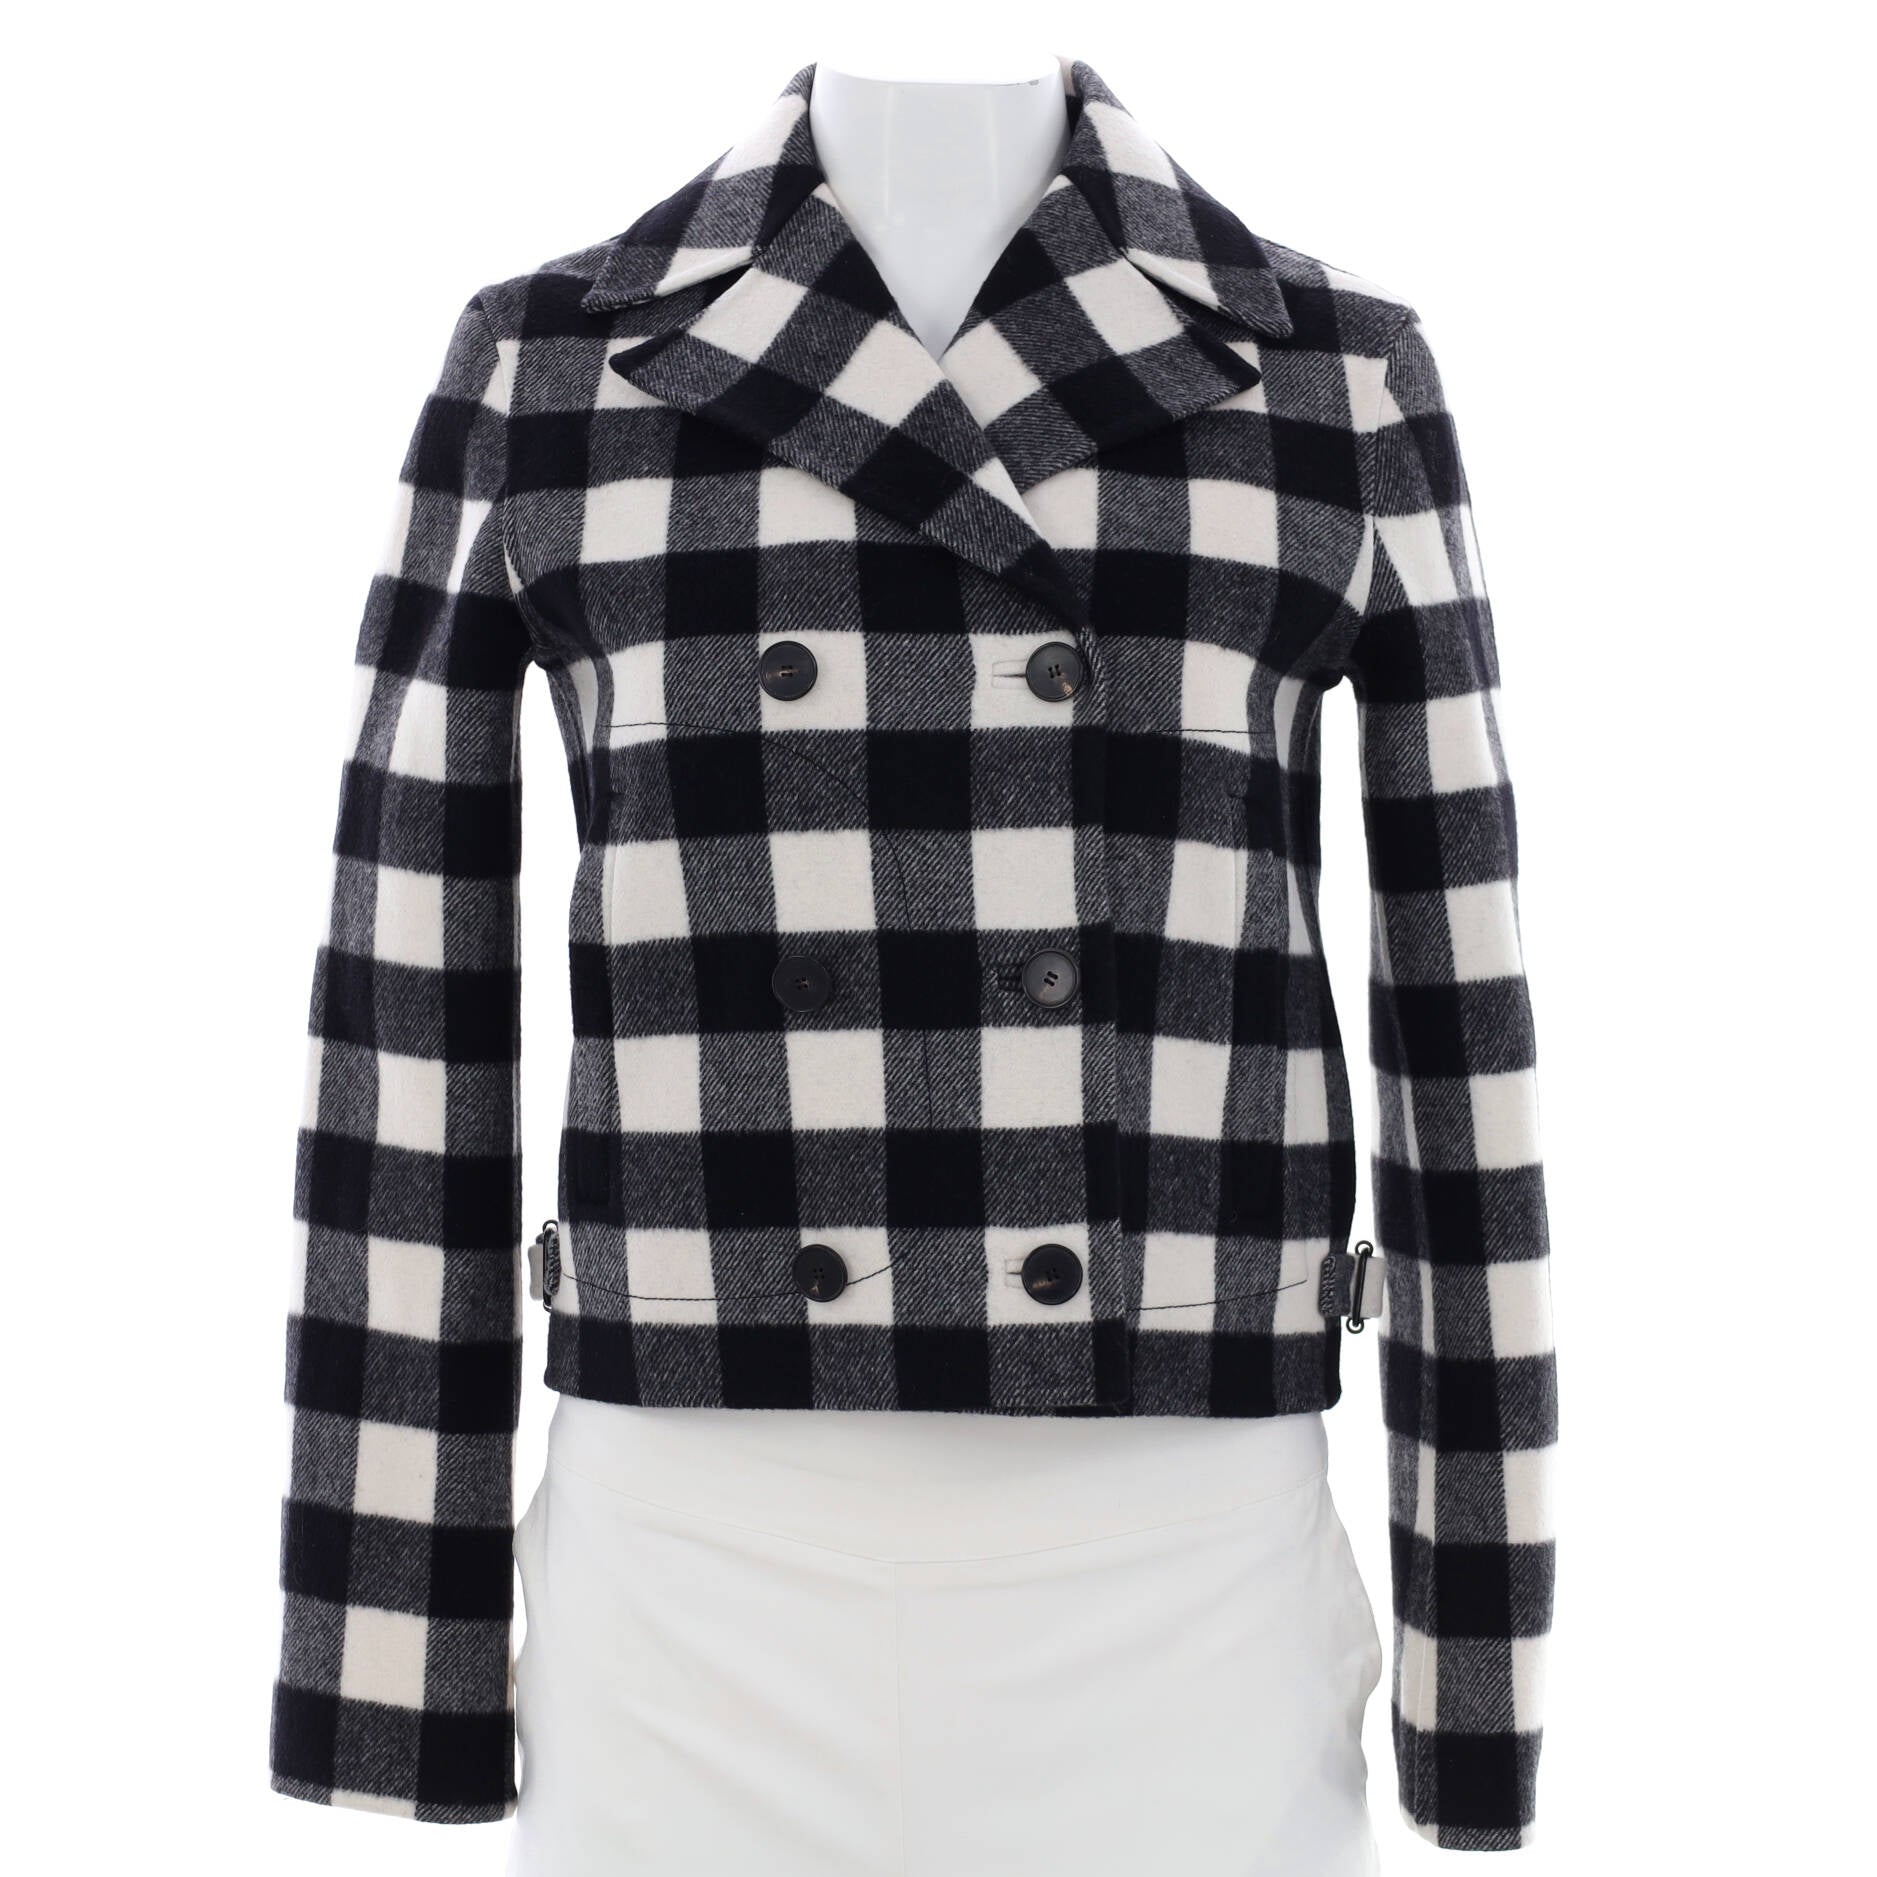 Women's Double Breasted Peacoat Printed Wool